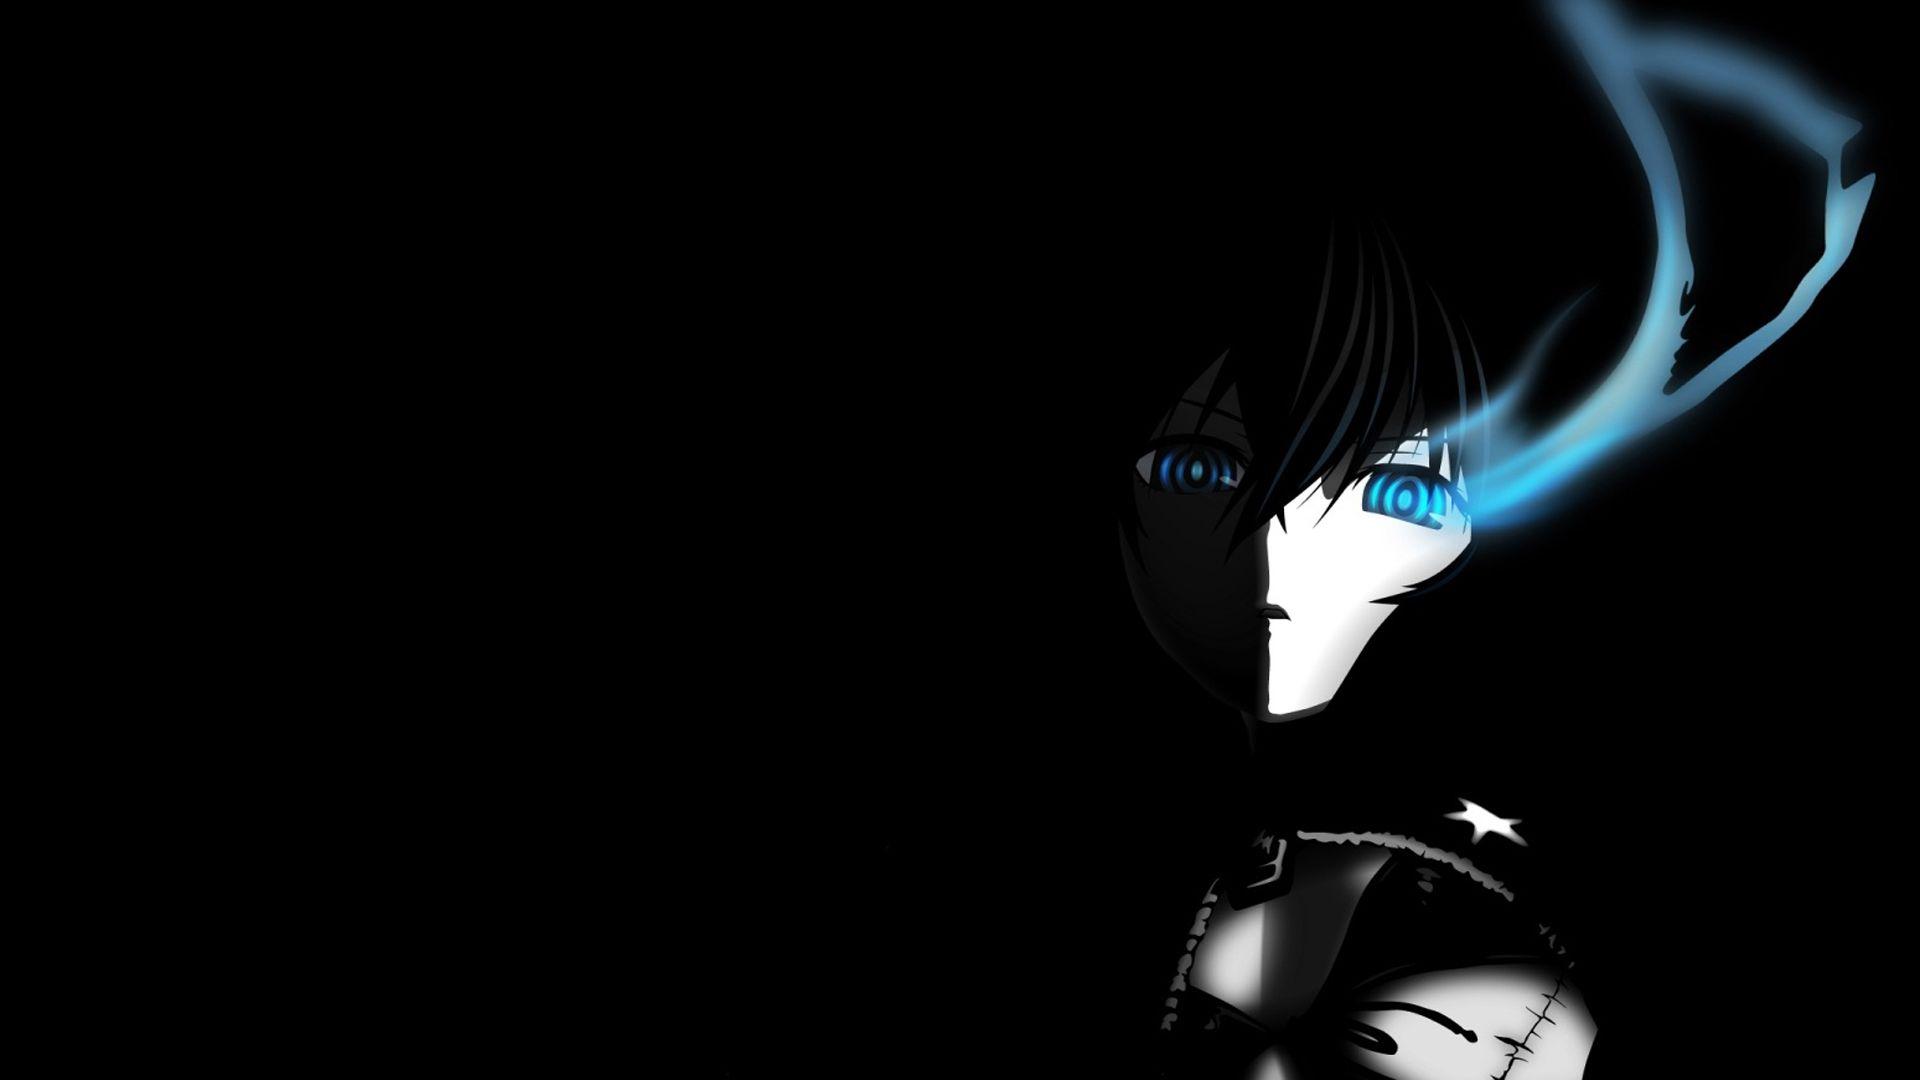 Black Anime Hd Wallpapers - Wallpaper Cave